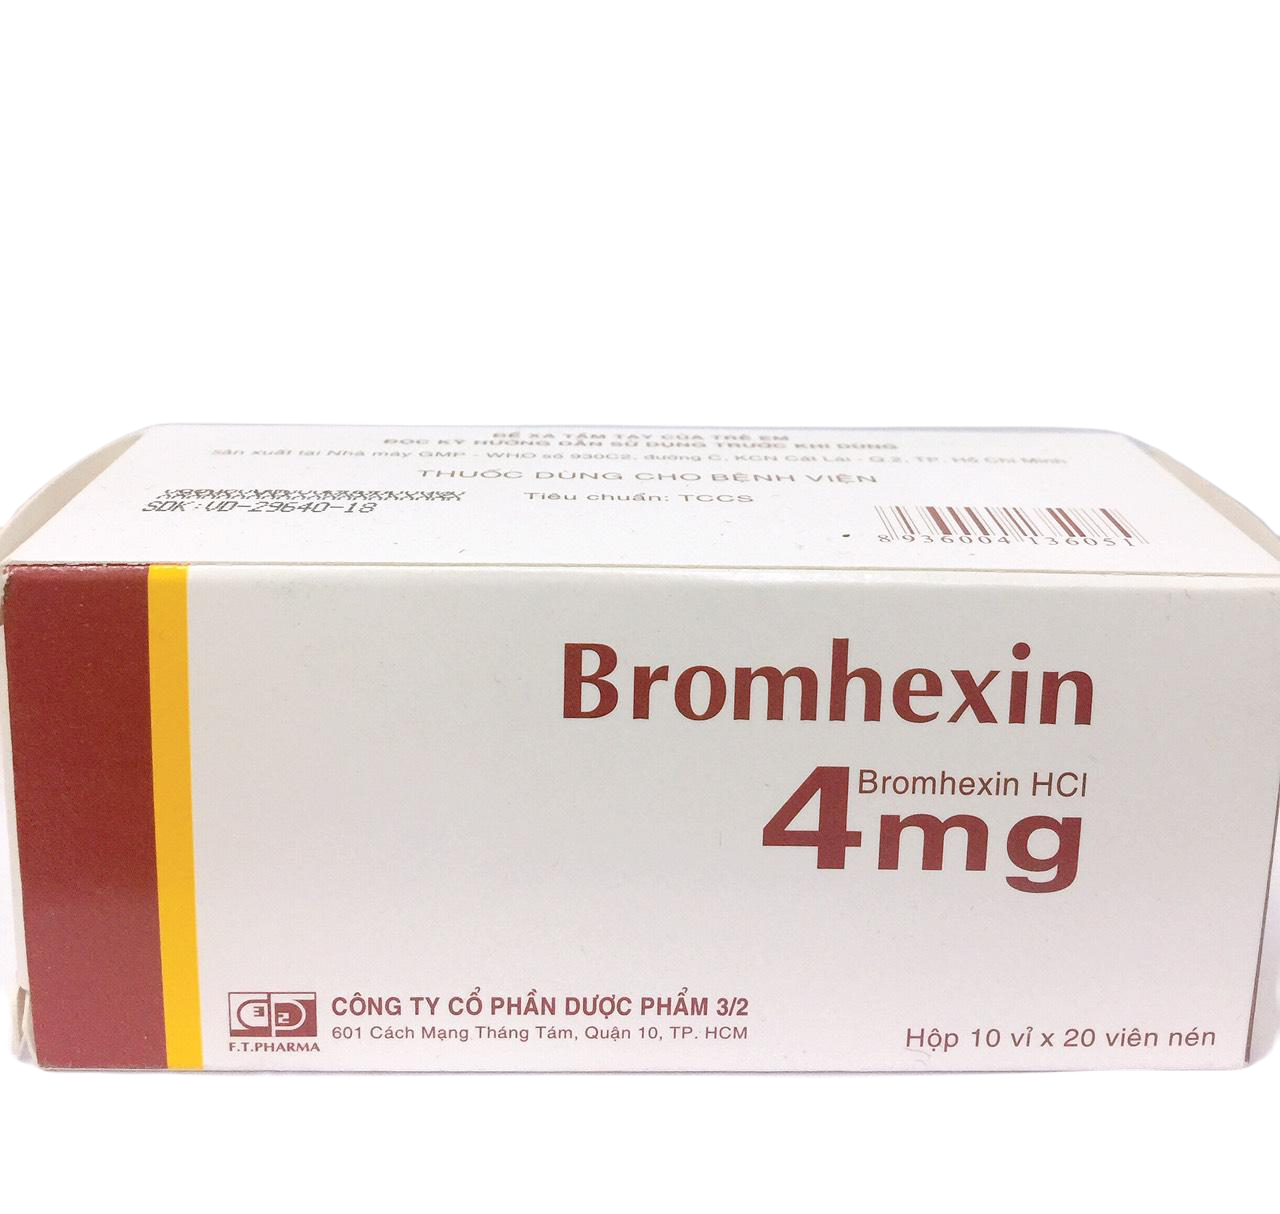 Bromhexin 4mg DP 3/2 (H/200v)